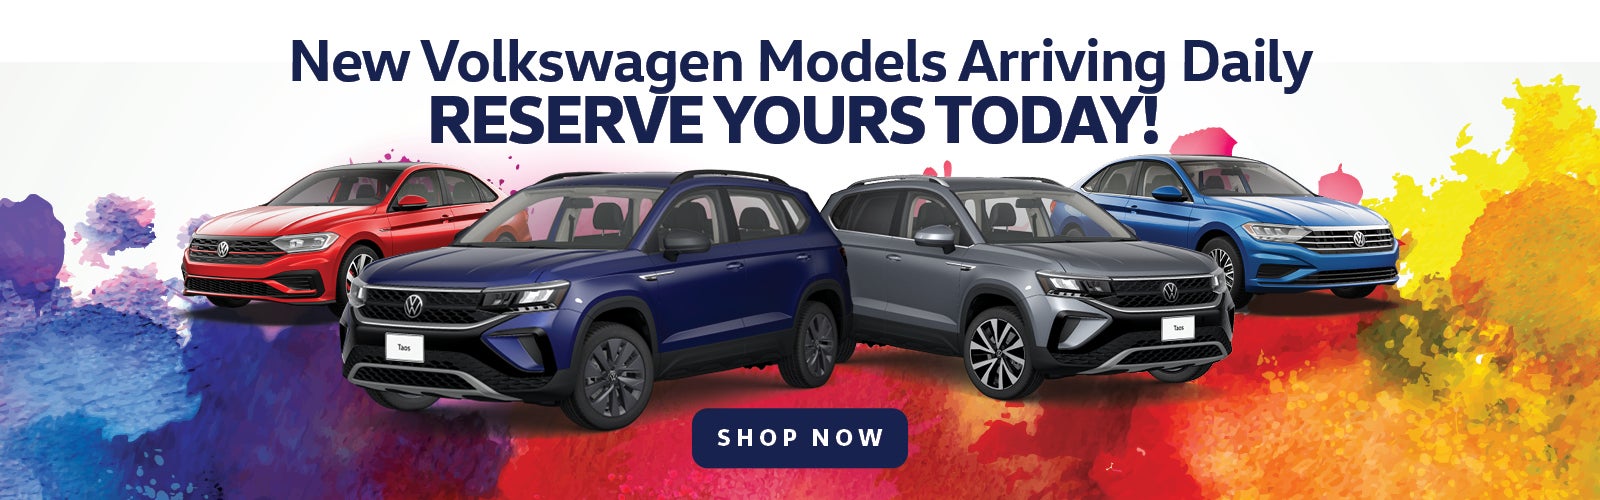 Reserve Your New VW Today!